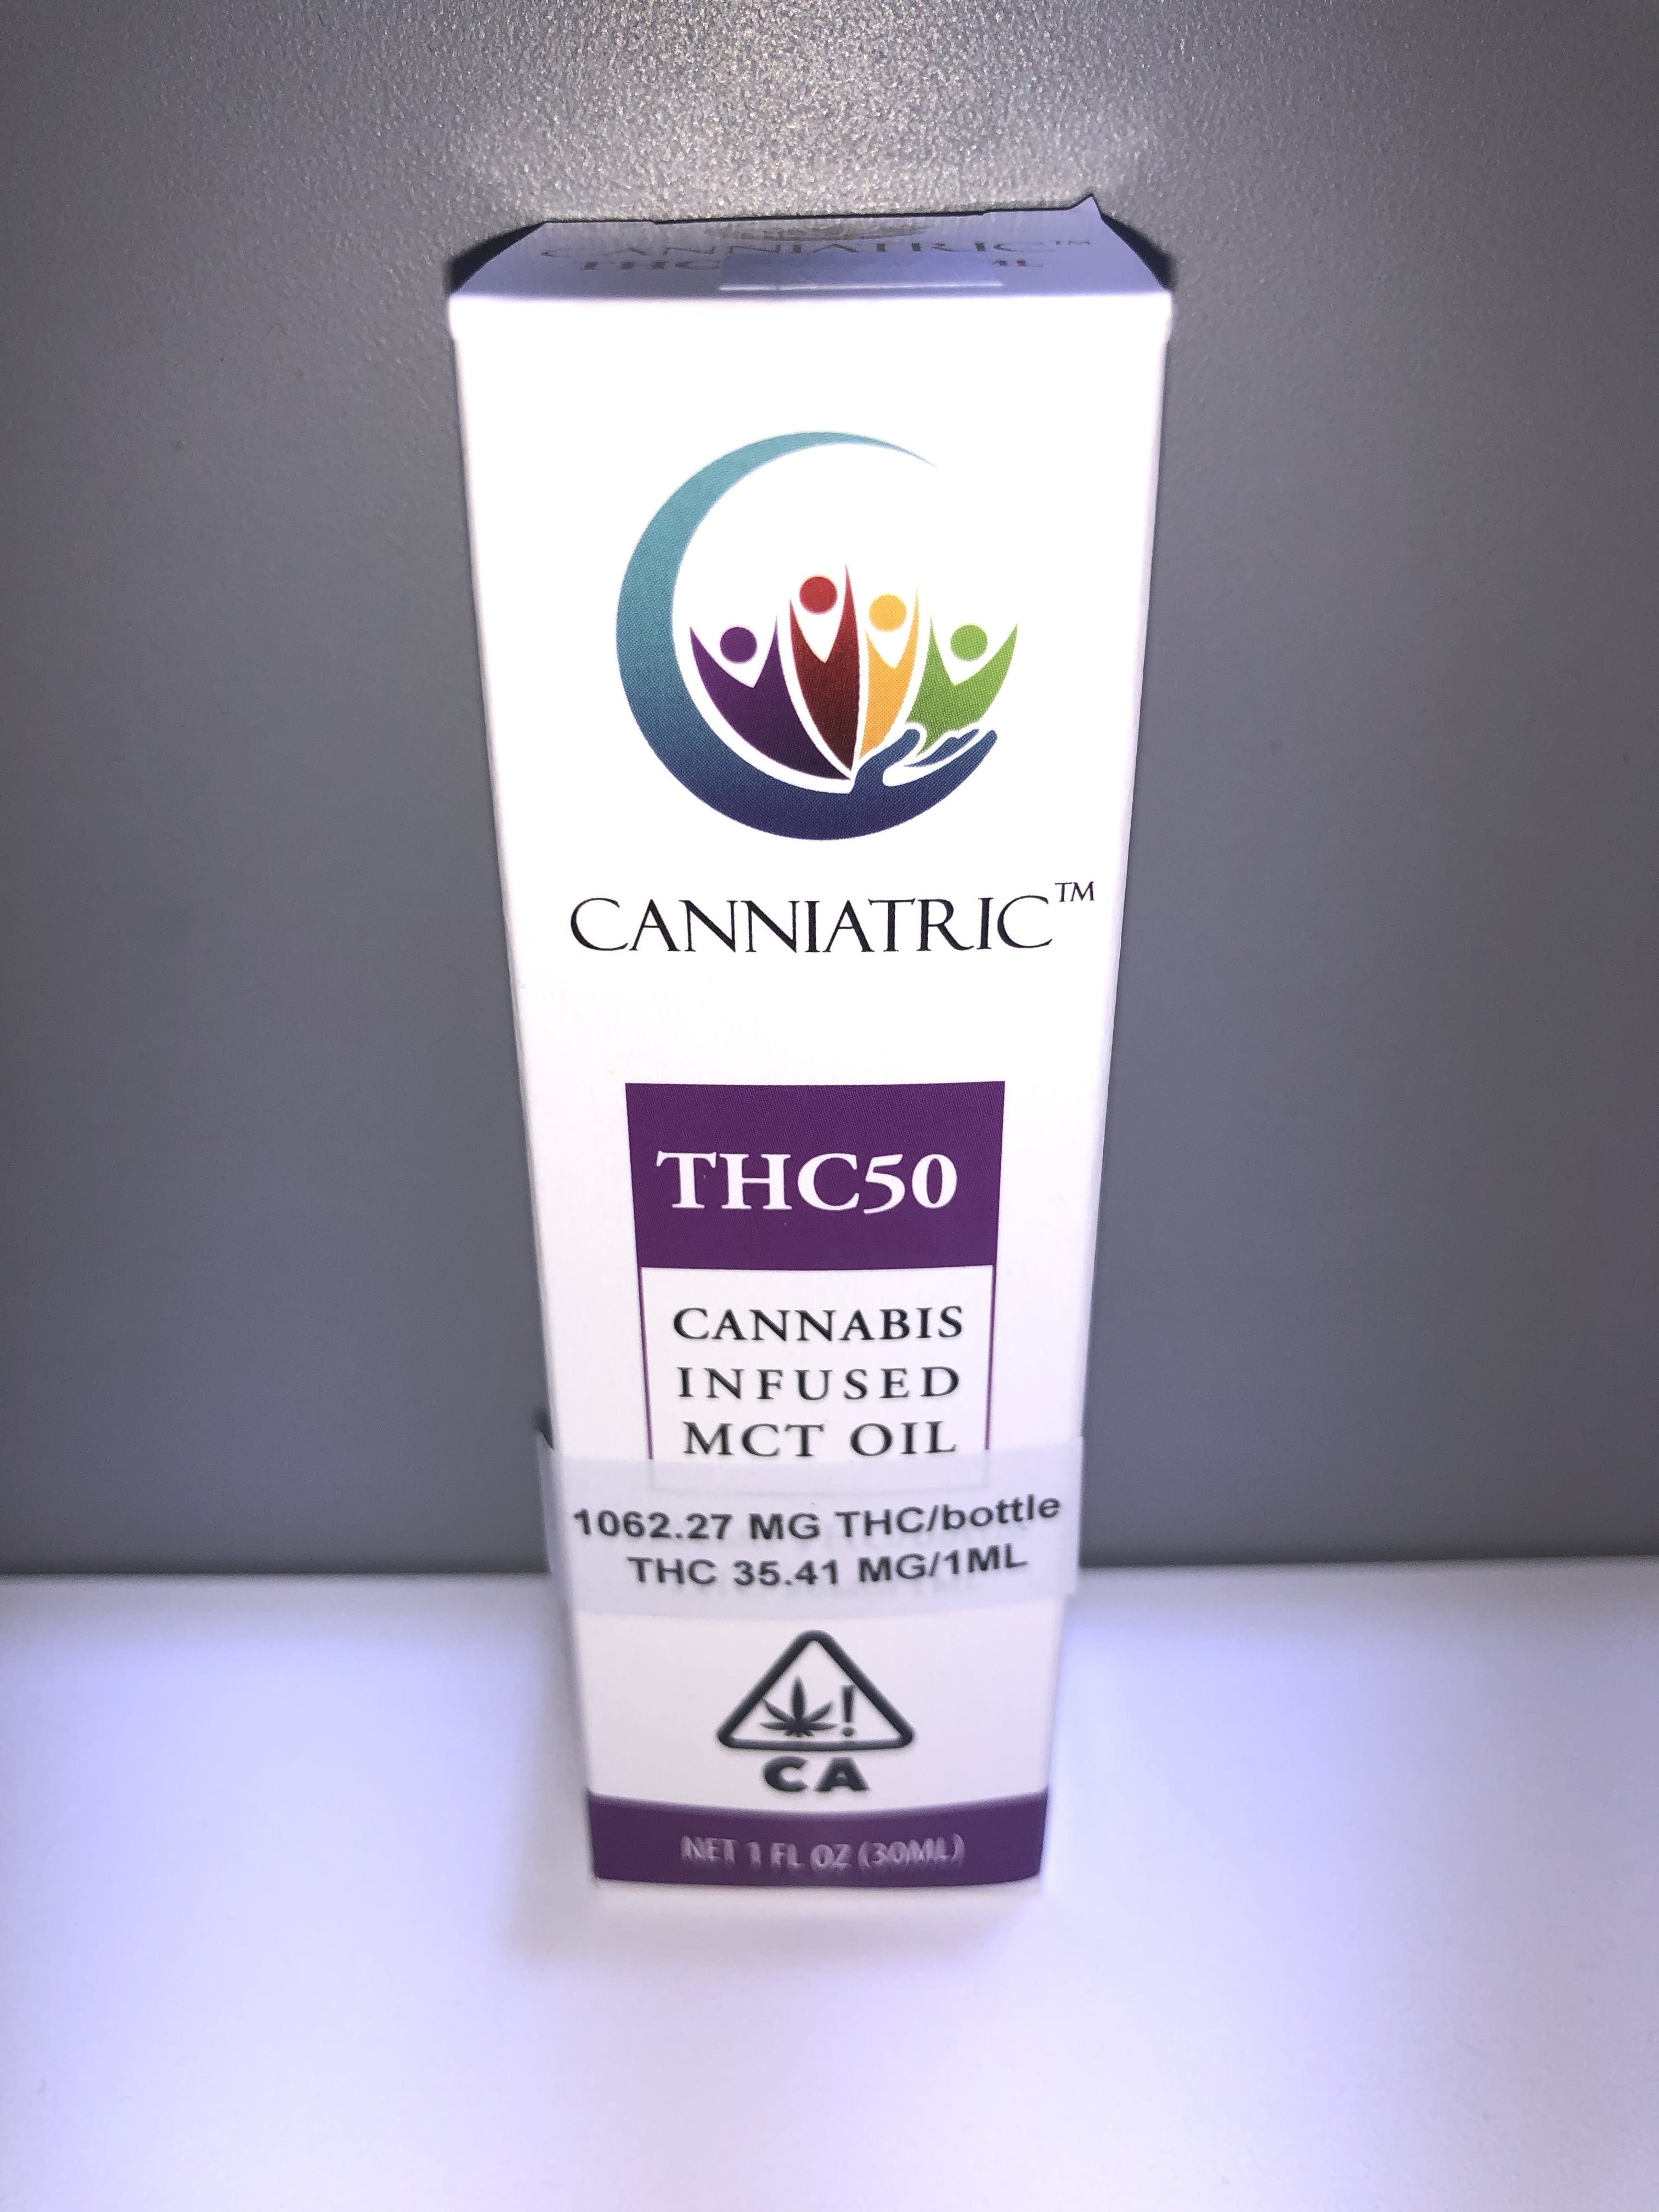 tincture-thc-50-cannabis-infused-mct-oil-by-canniatric